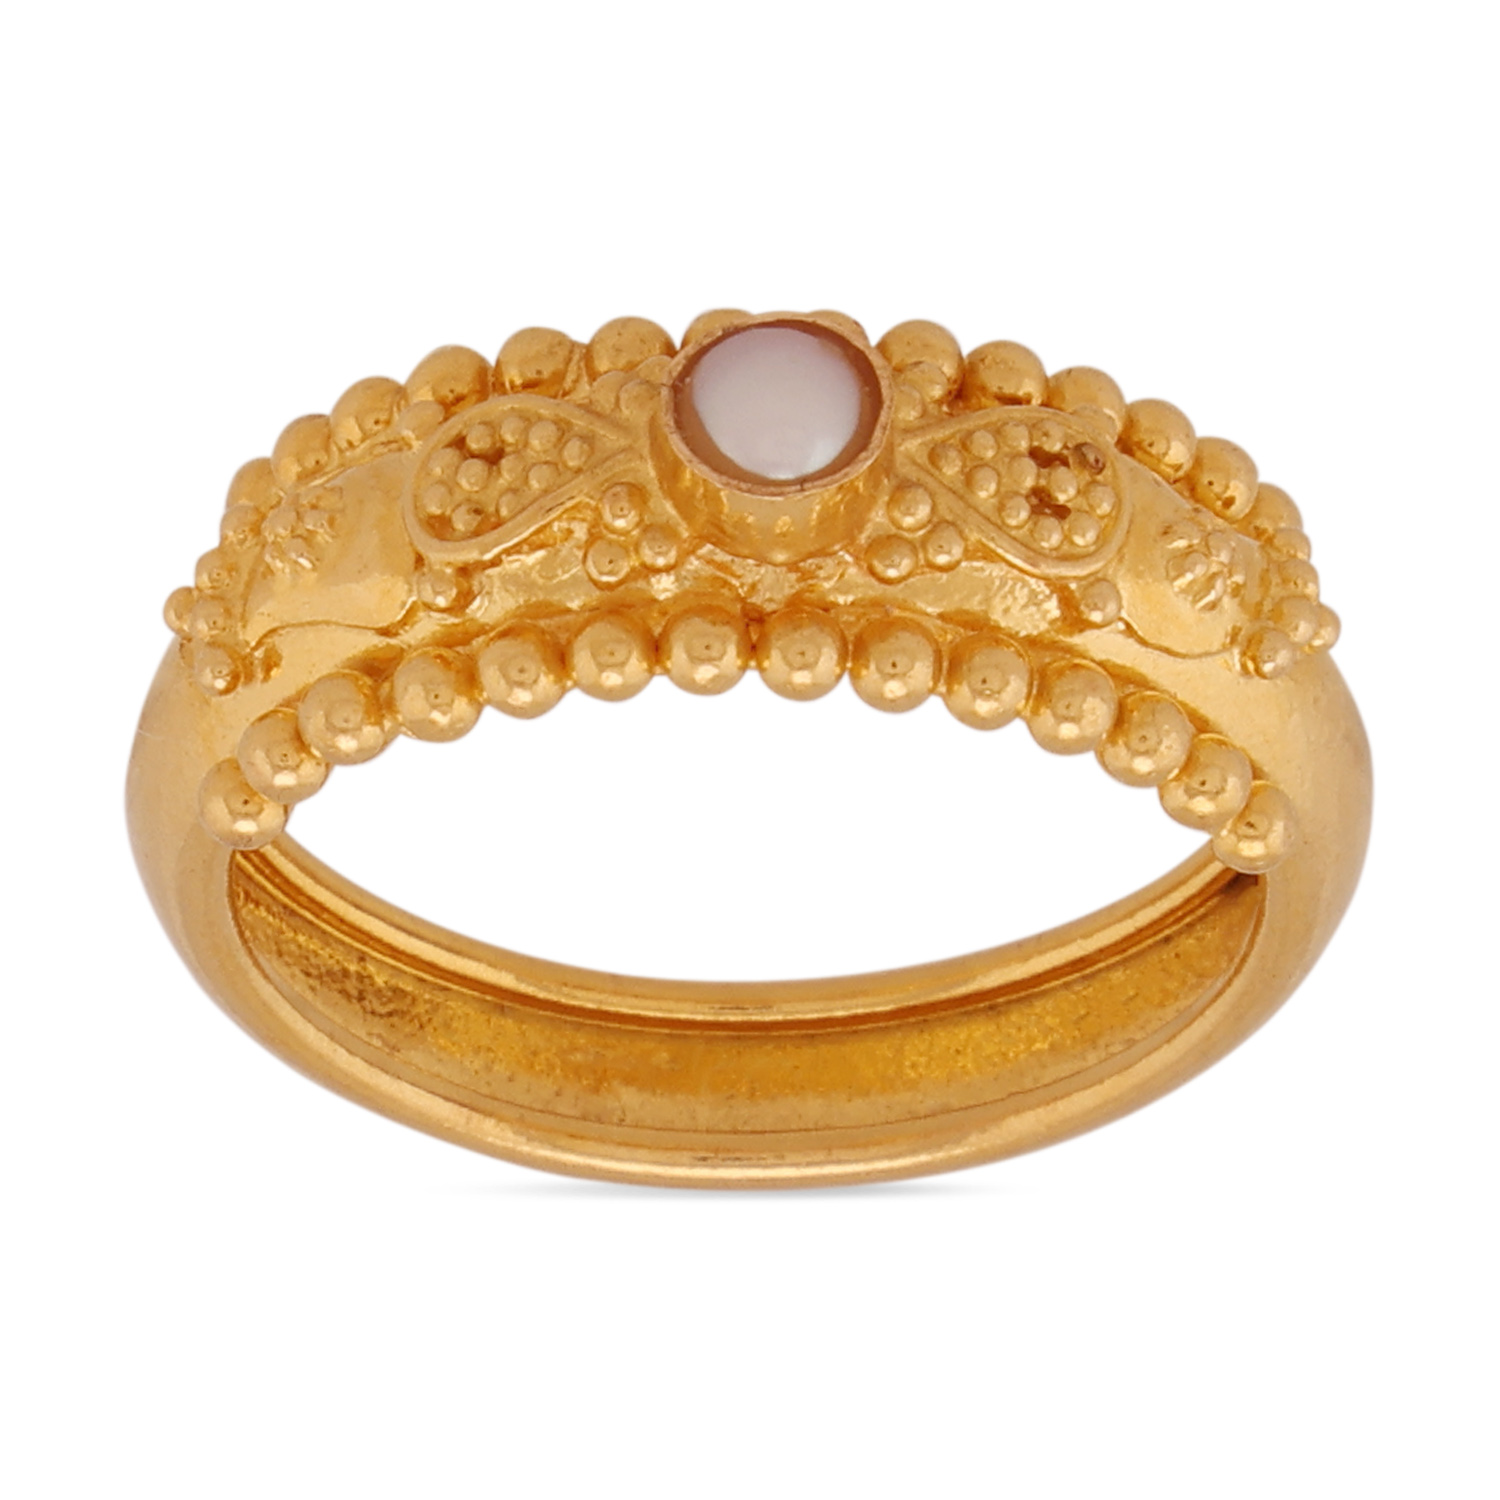 pearl ring aabi jewels 22 carat bis hallmark gold ring for woman